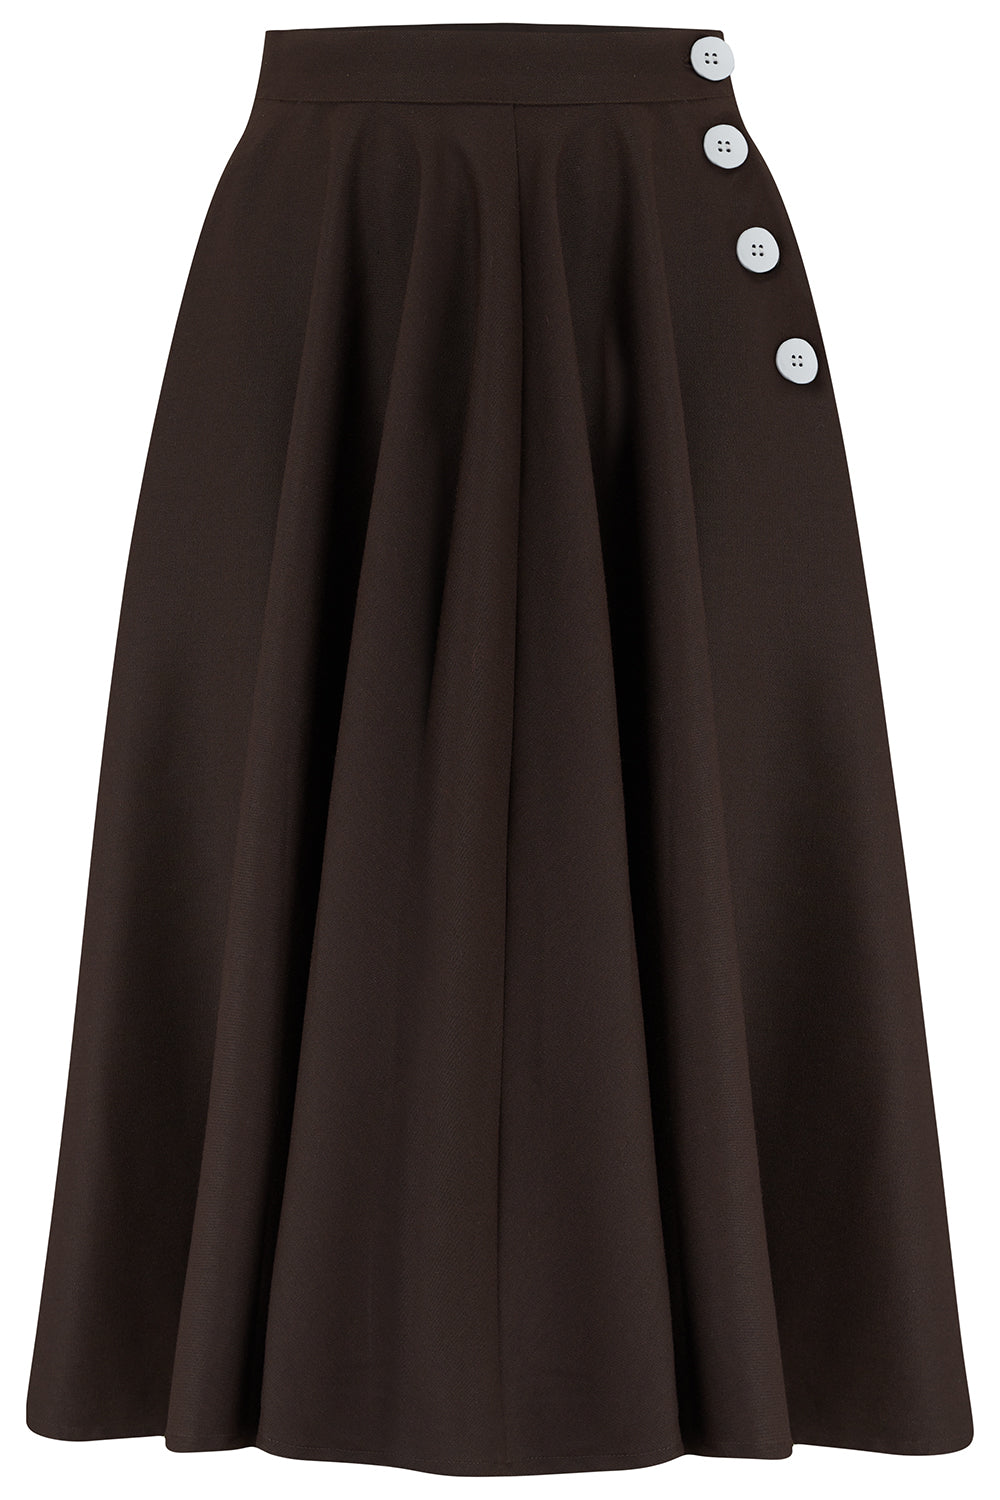 "Sylvia" Tailored Skirt in Solid Brown , Classic & Authentic 1940s Vintage Inspired Style - CC41, Goodwood Revival, Twinwood Festival, Viva Las Vegas Rockabilly Weekend Rock n Romance The Seamstress Of Bloomsbury